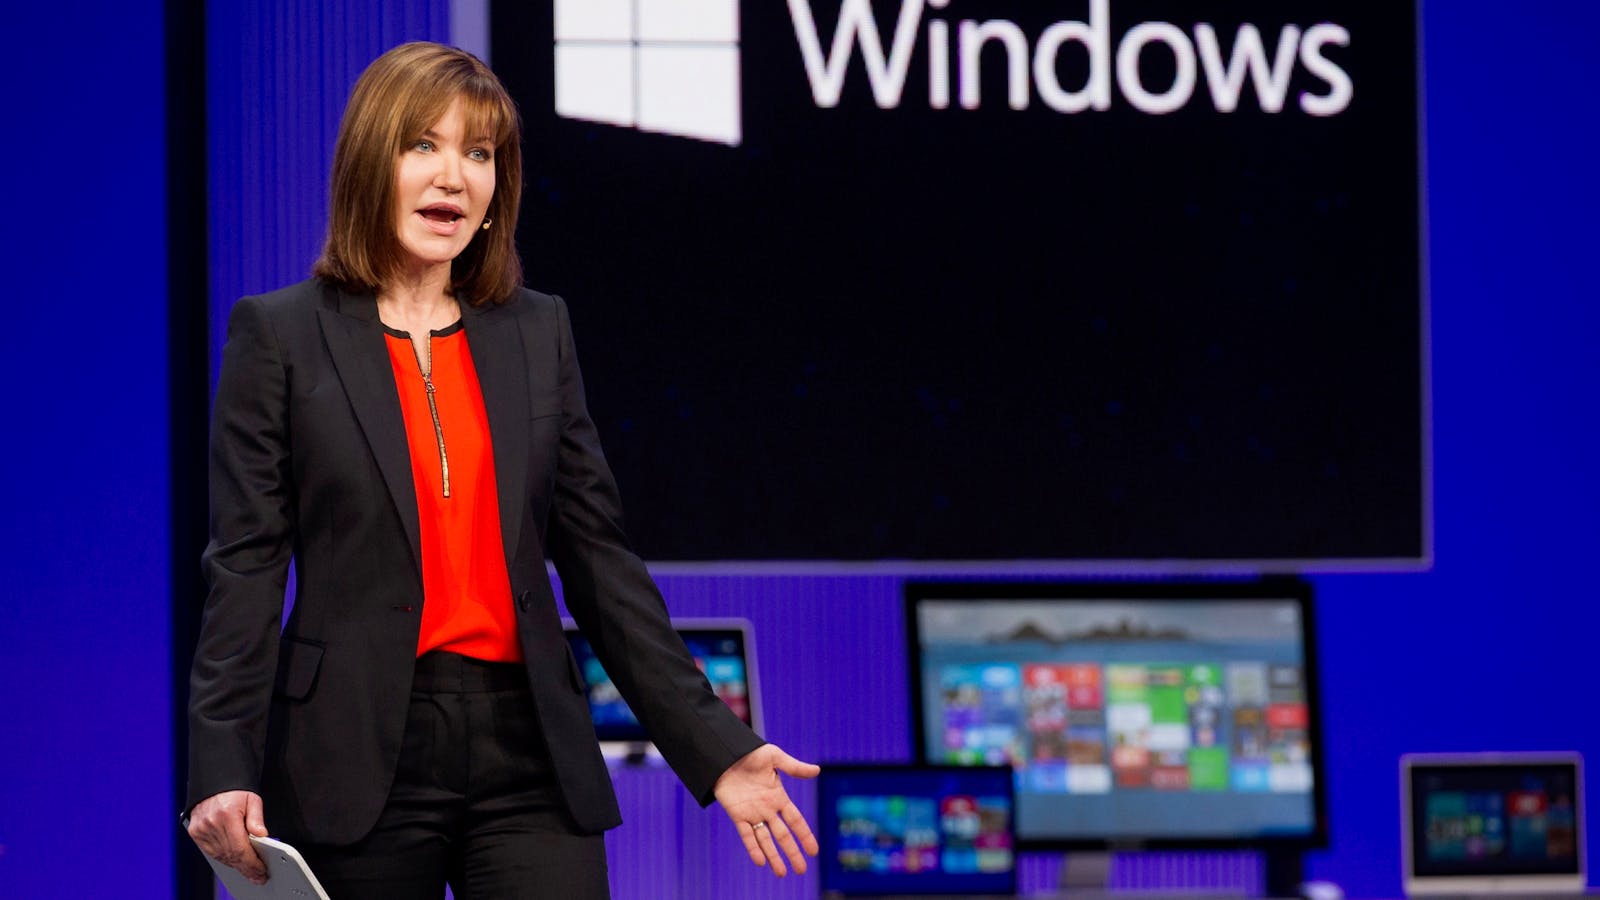 Microsoft executive Julie Larson-Green at a Microsoft developers conference in 2013. Photo by Bloomberg.